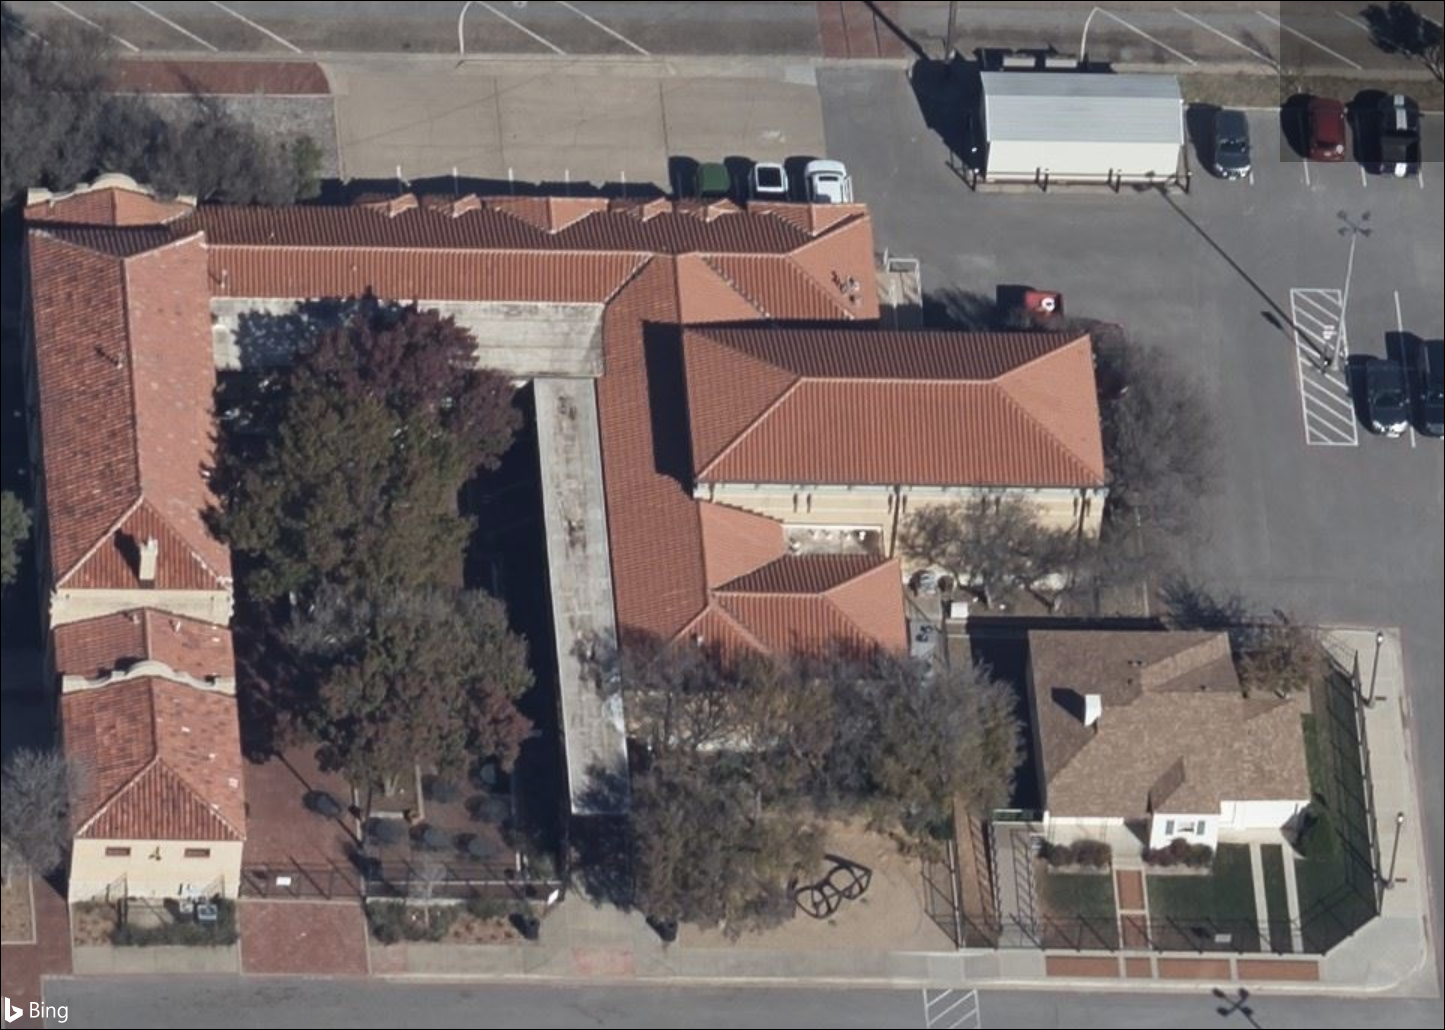 Bing Maps Released New Bird's Eye Imagery BuddyHollyCenter_LubbyTX.png